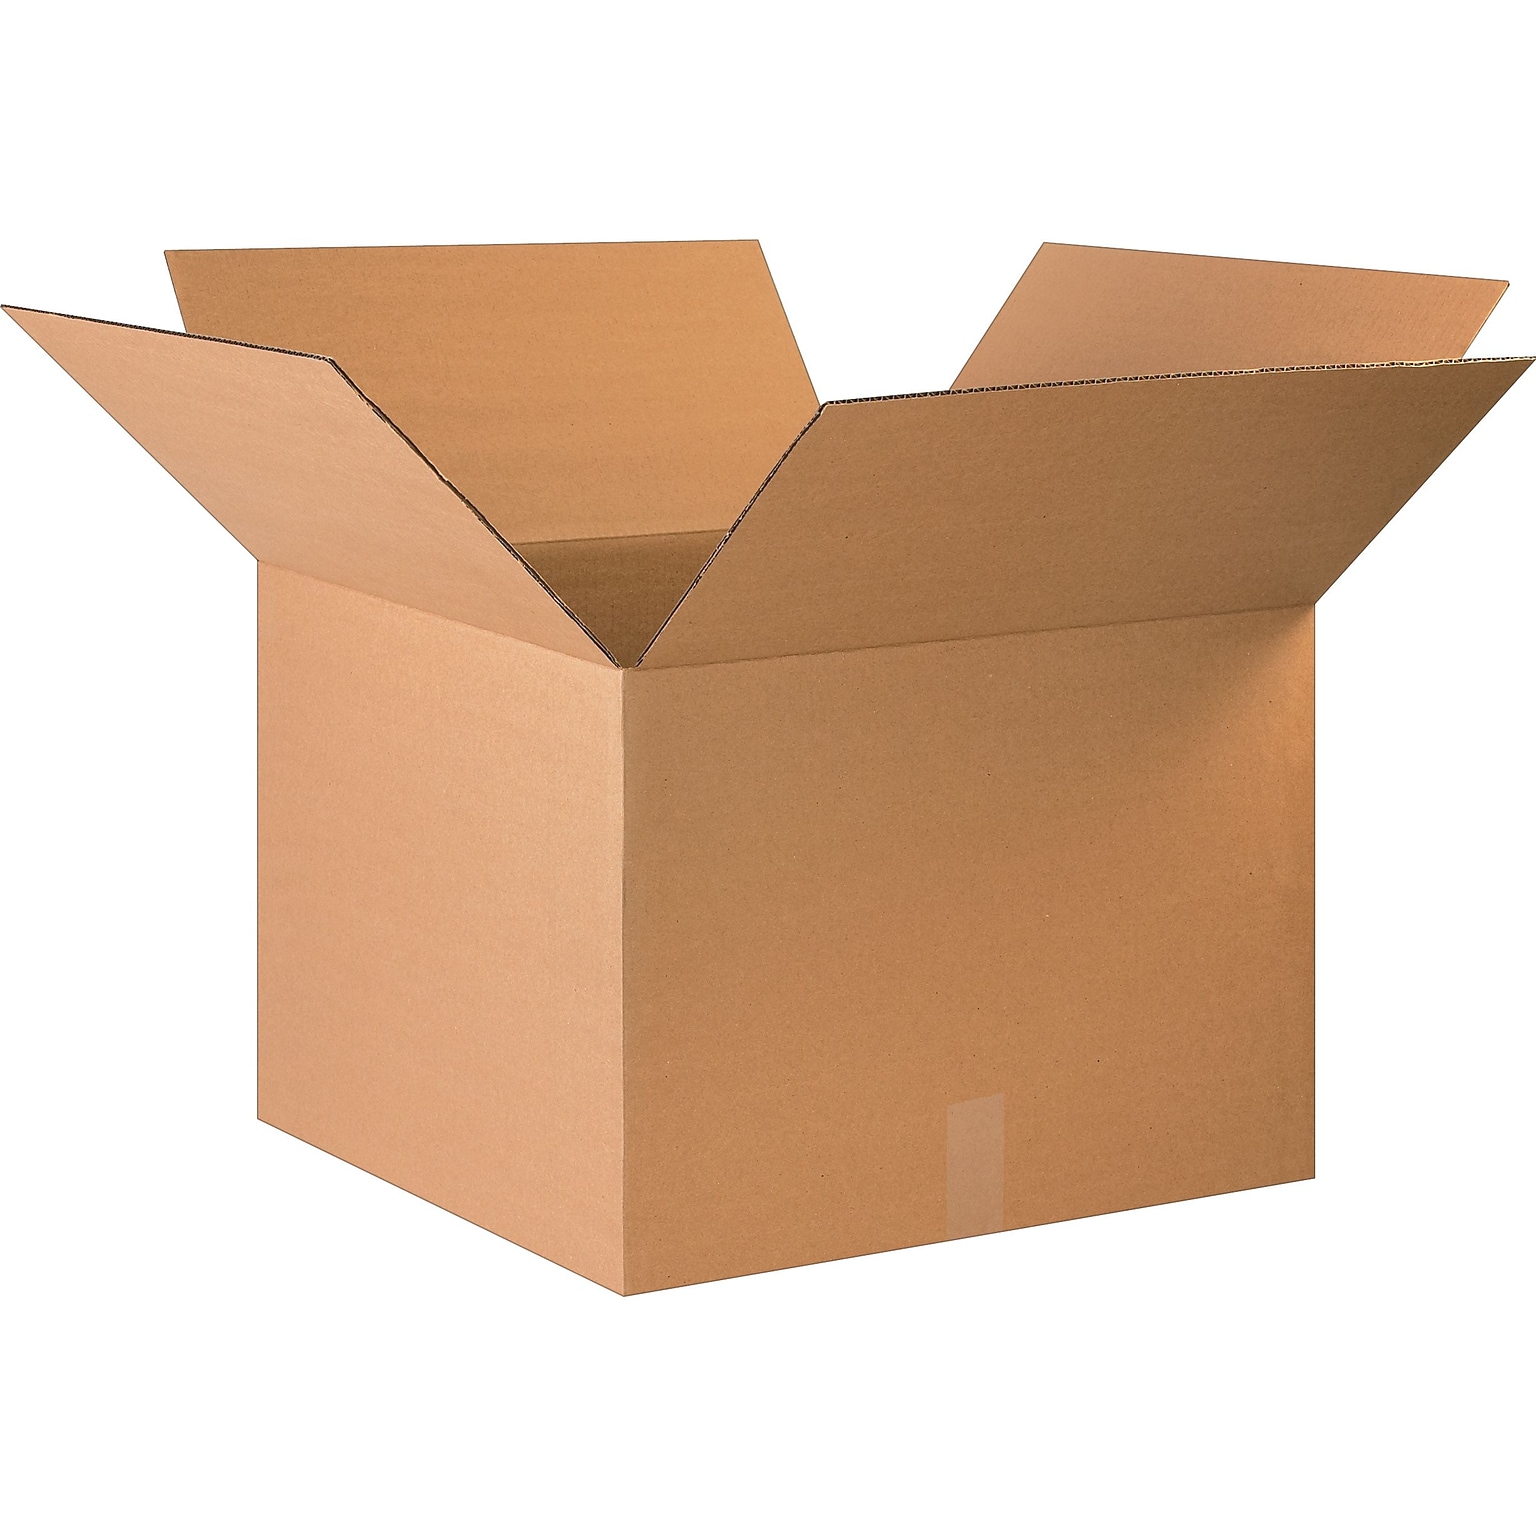 22  x  22  x  16  Shipping  Boxes,  32  ECT,  Brown,  10/Bundle  (BS222216)